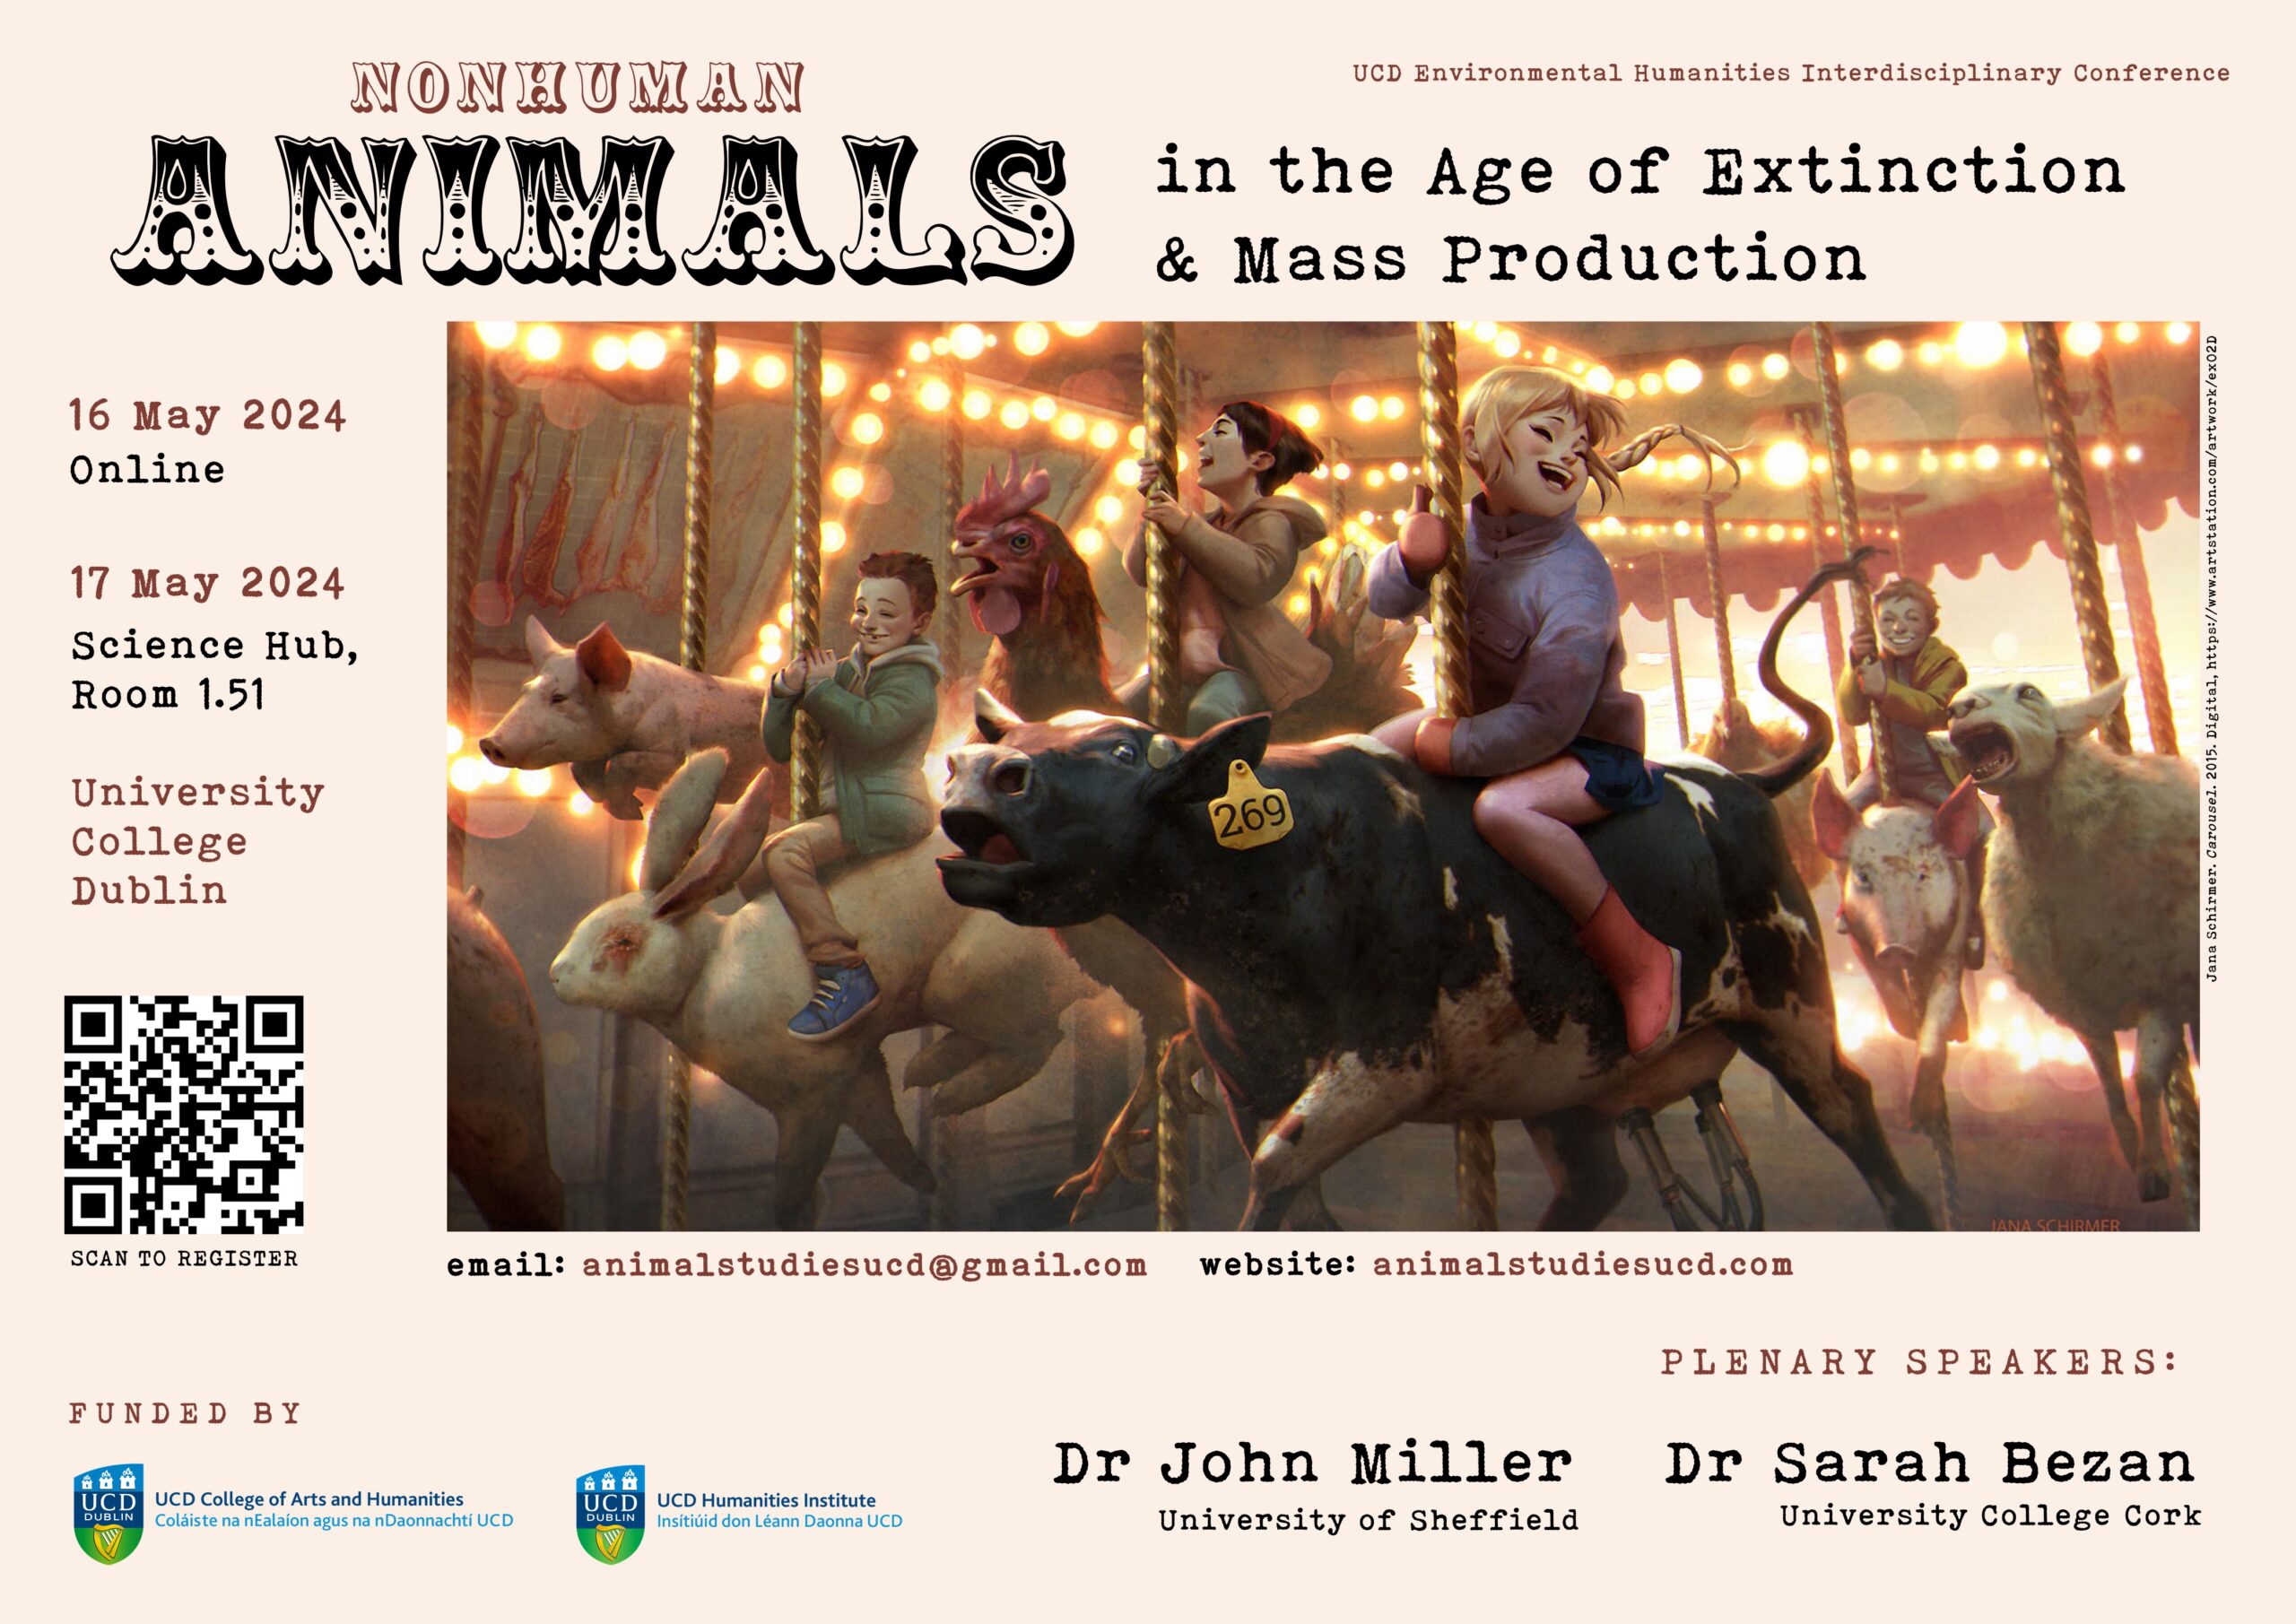 Nonhuman Animals in the Age of Extinction and Mass Production Conference Poster